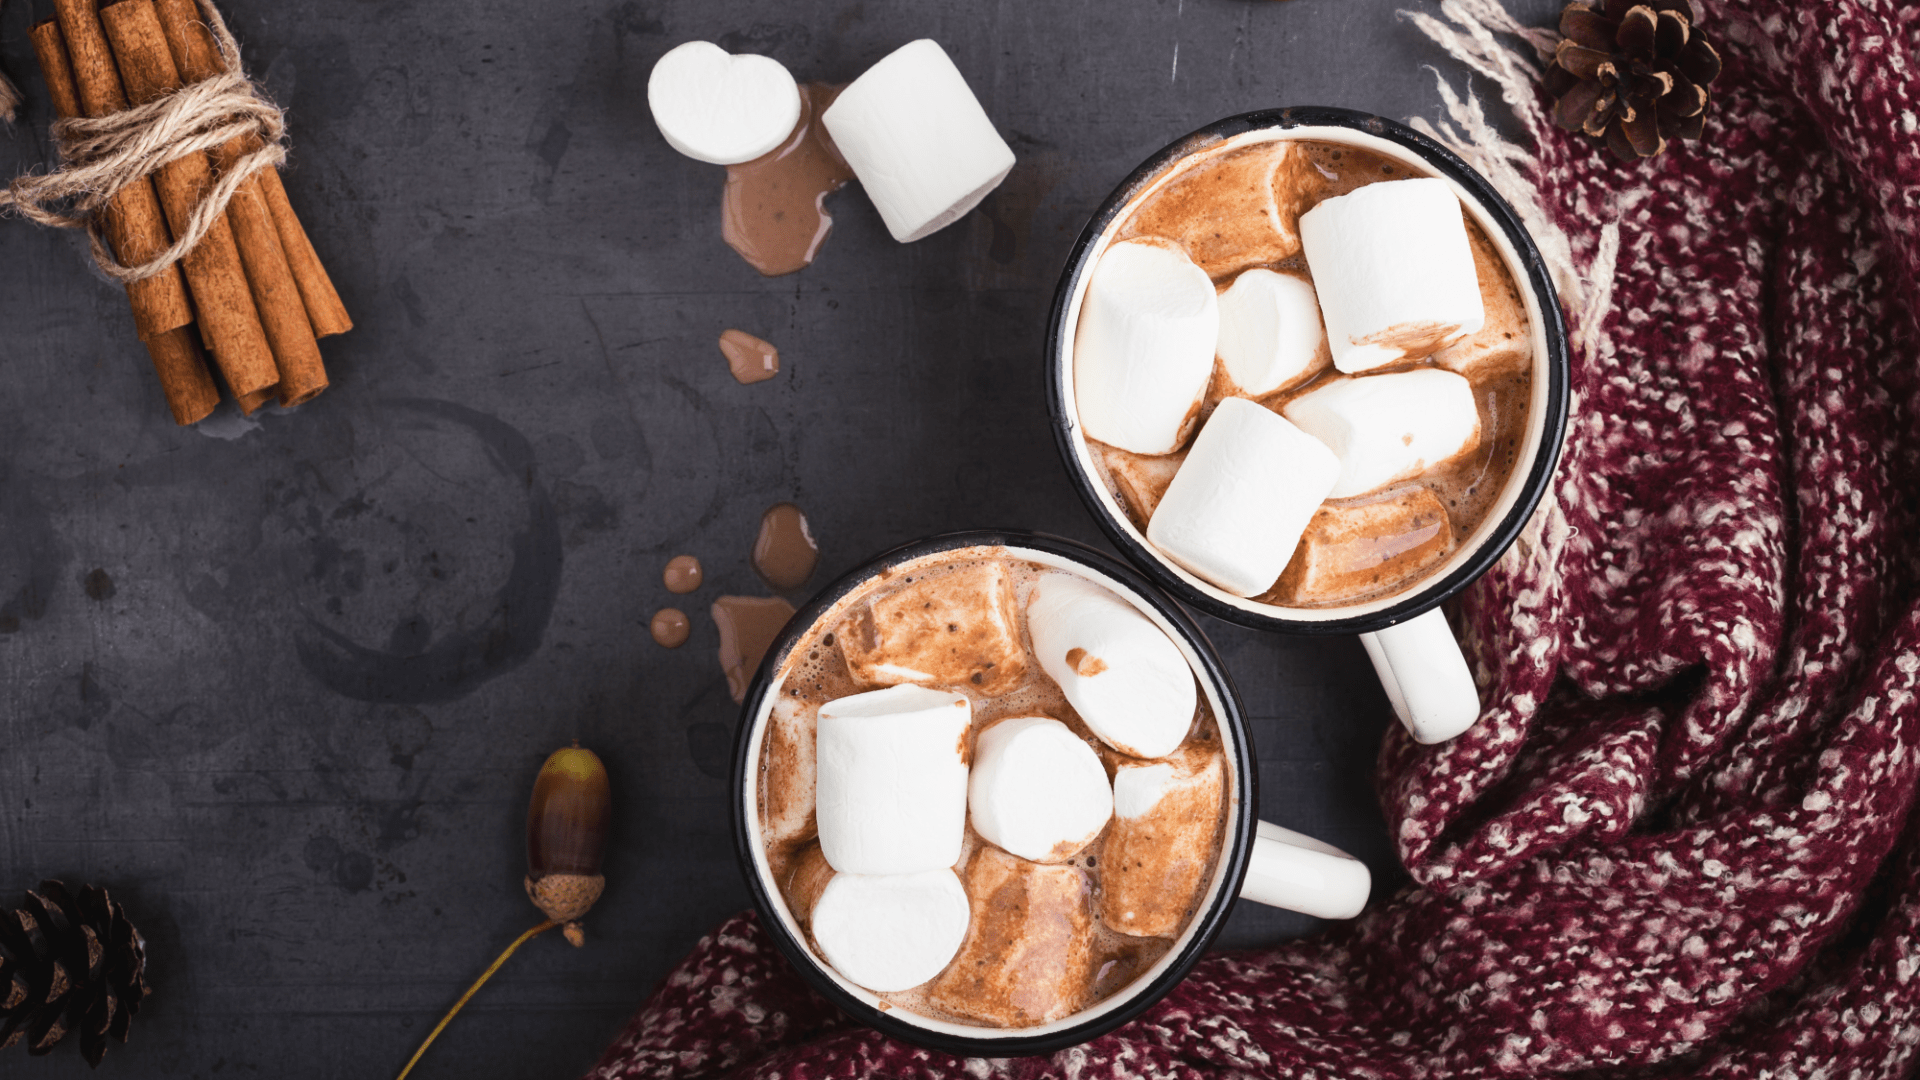 Hot Chocolate Recipes That Will Change the Way You Feel About Winter